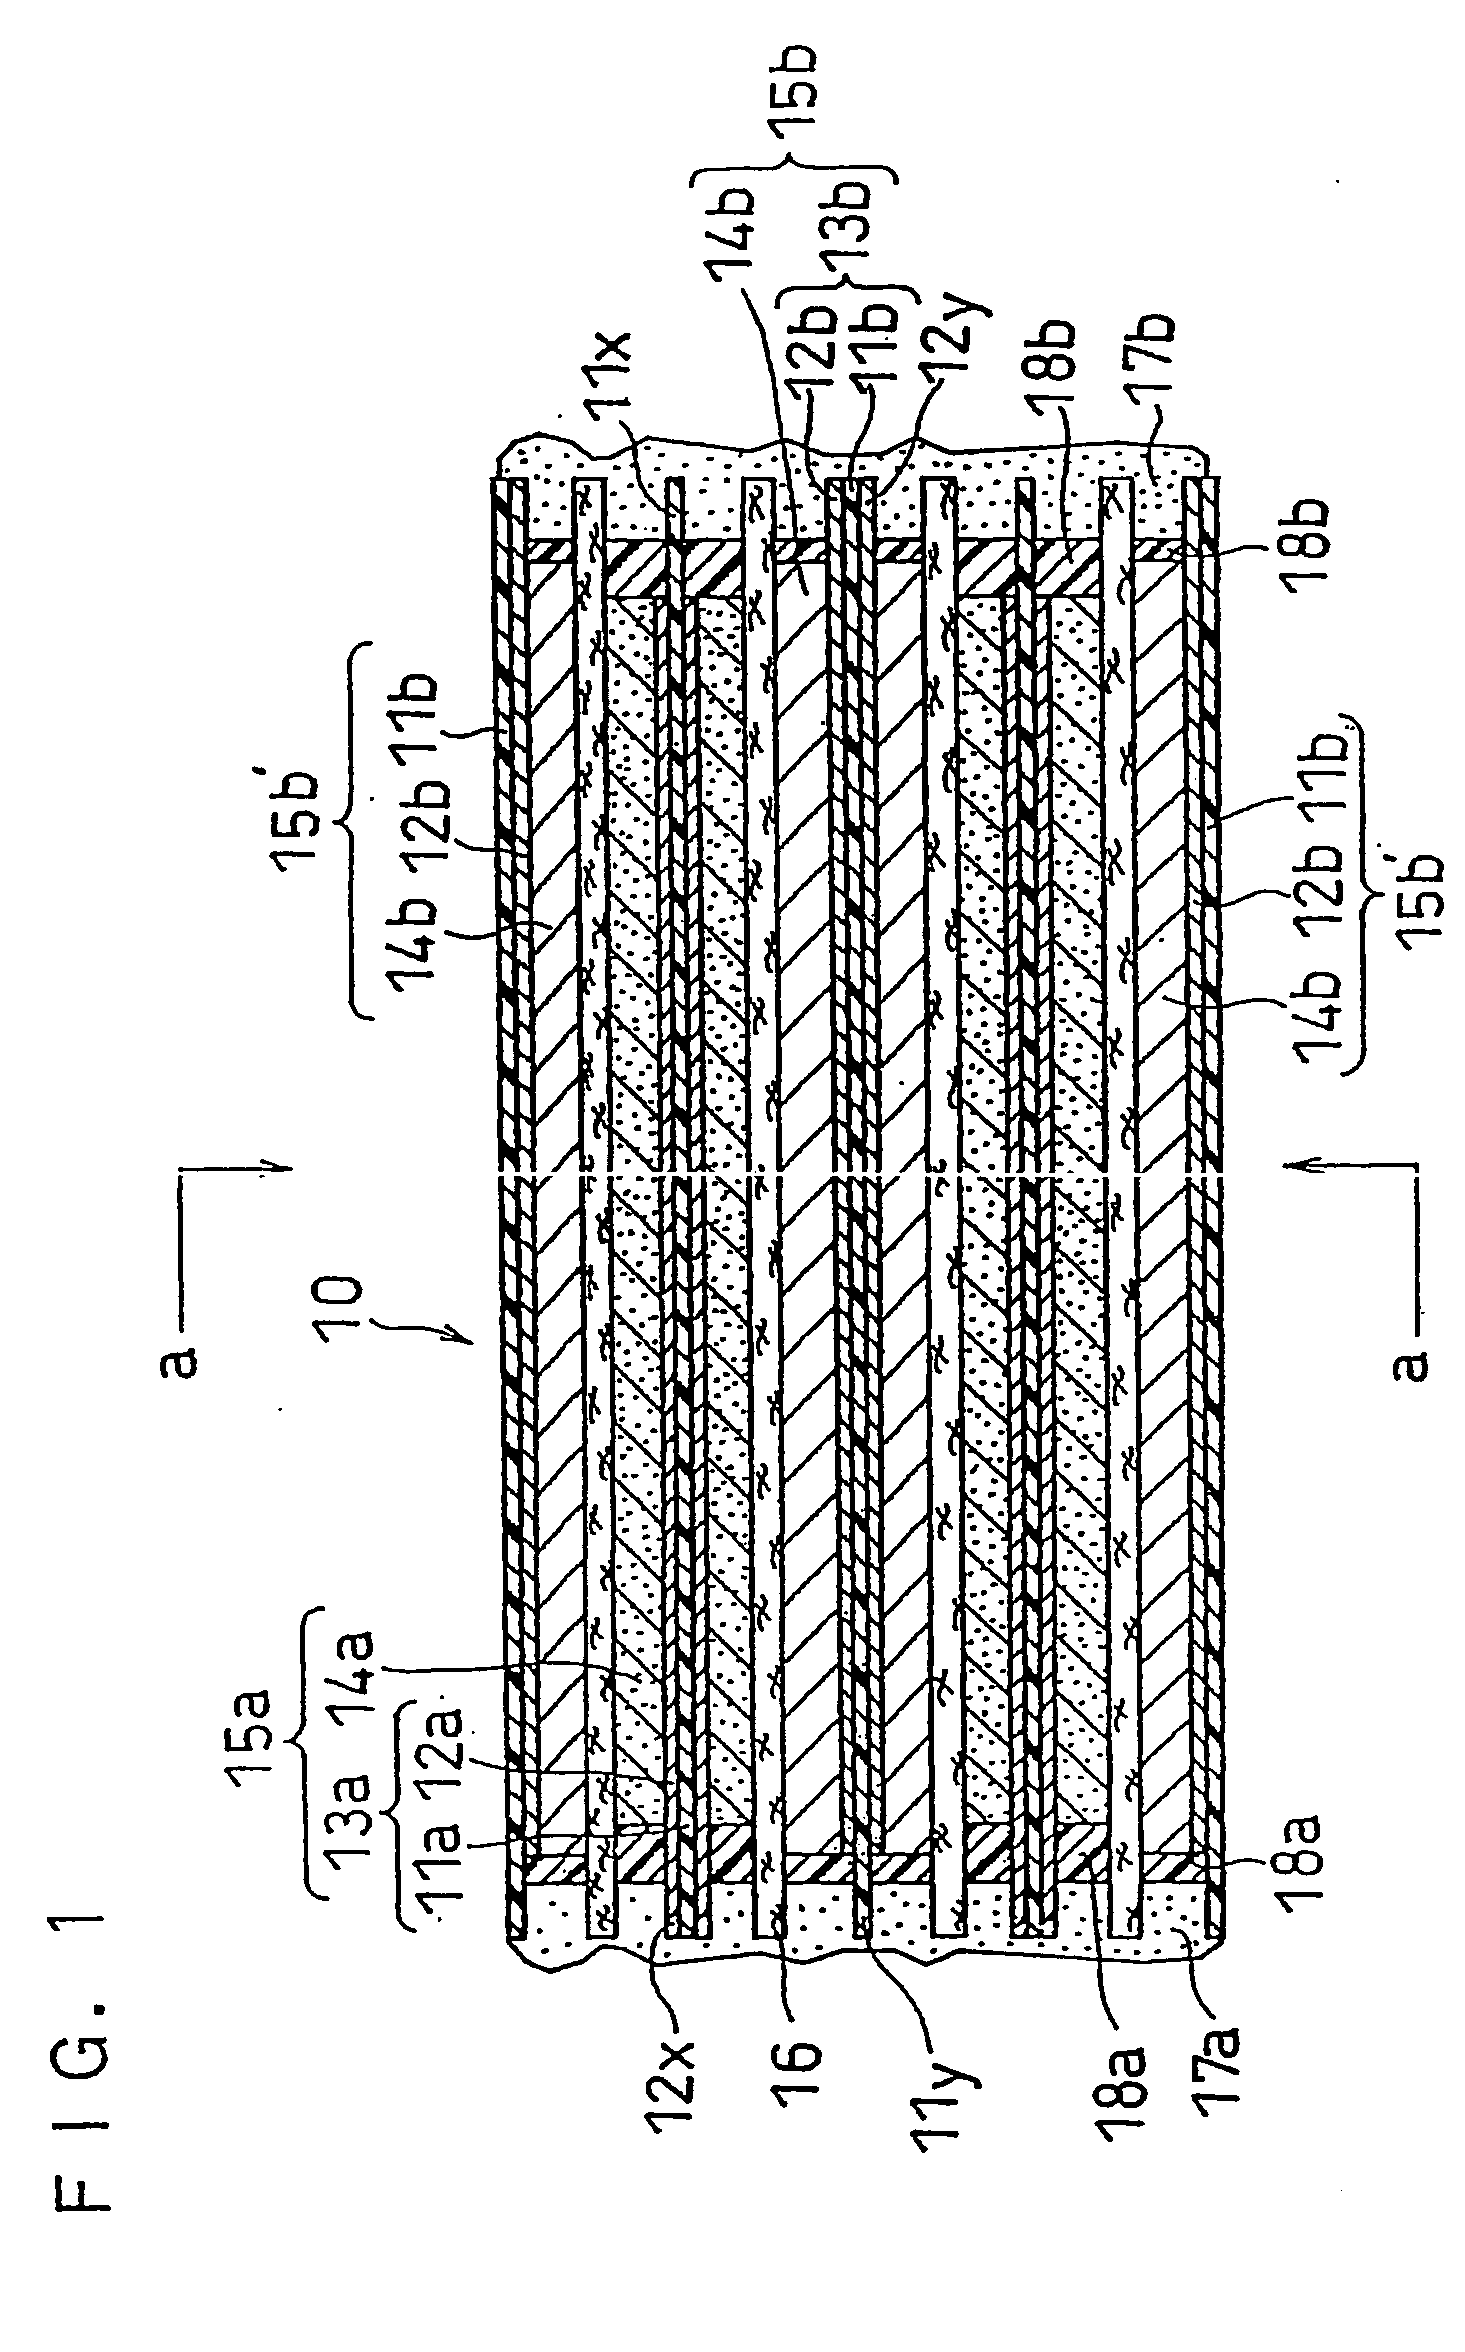 Electrochemical device and method for manaufacturing same